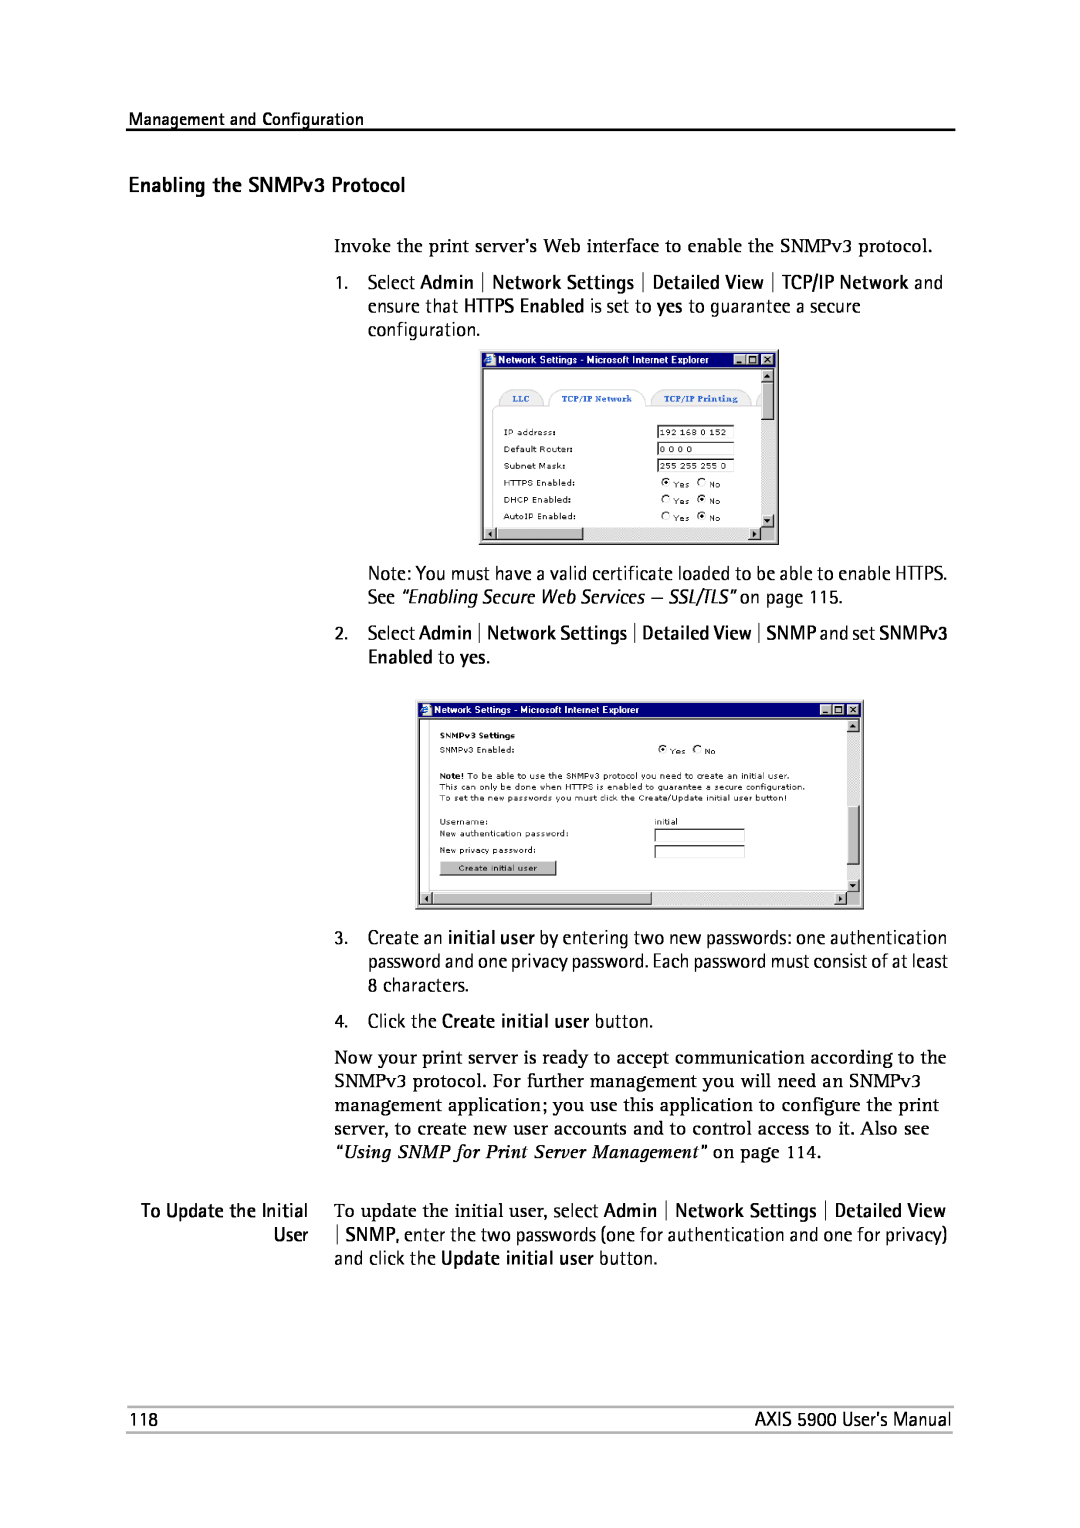 Philips 5900 user manual Enabling the SNMPv3 Protocol, See “Enabling Secure Web Services - SSL/TLS” on page 